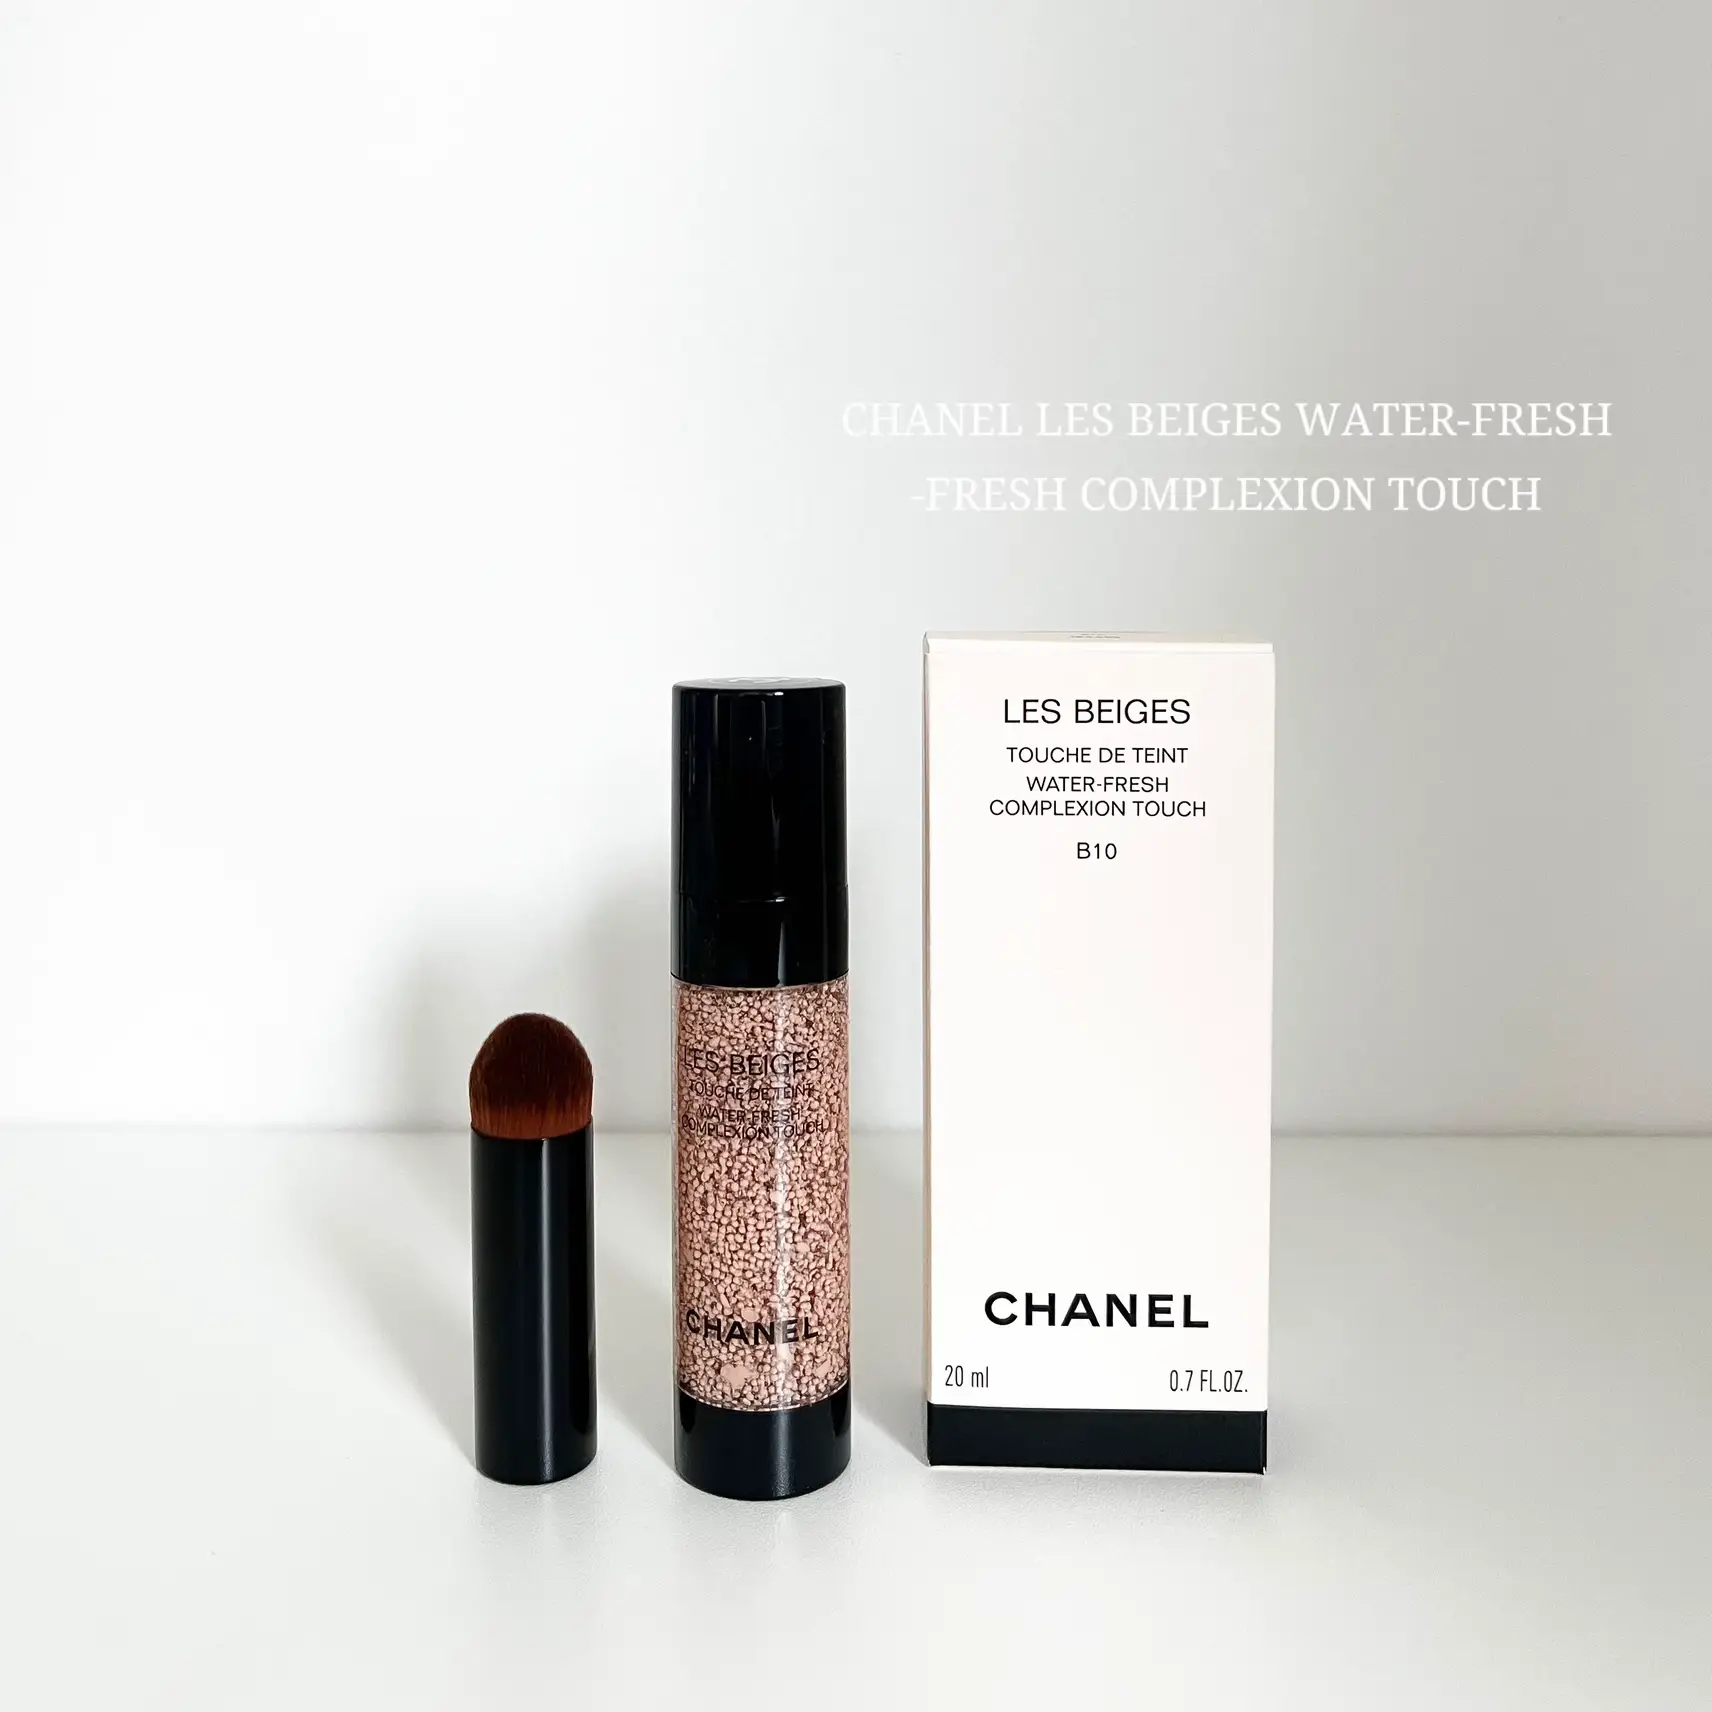 CHANEL LES BEIGES WATER-FRESH COMPLEXION TOUCH